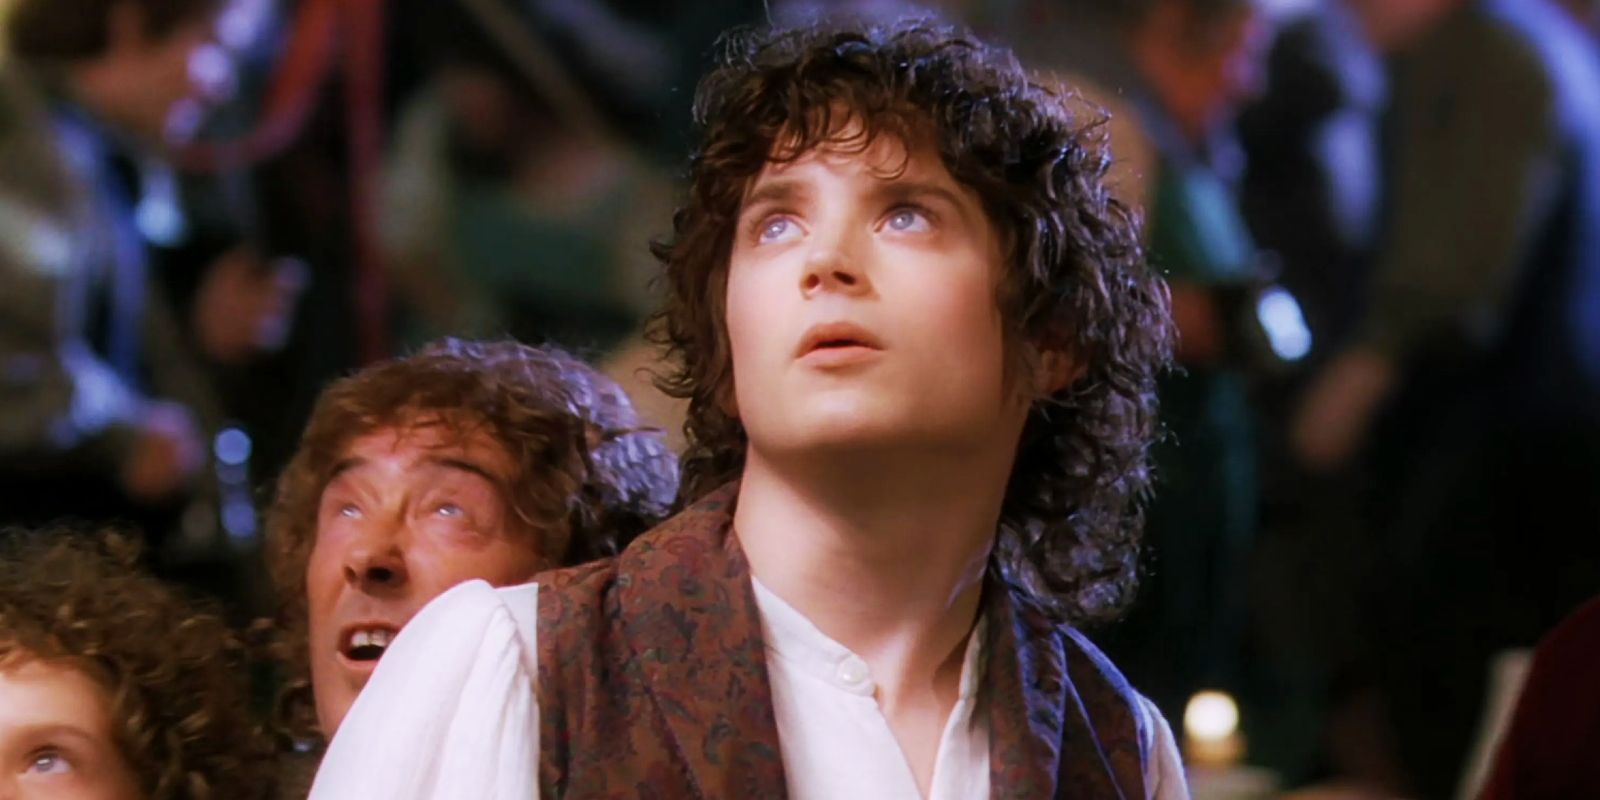 Elijah Wood as Frodo in The Lord of the Rings The Fellowship of the Ring